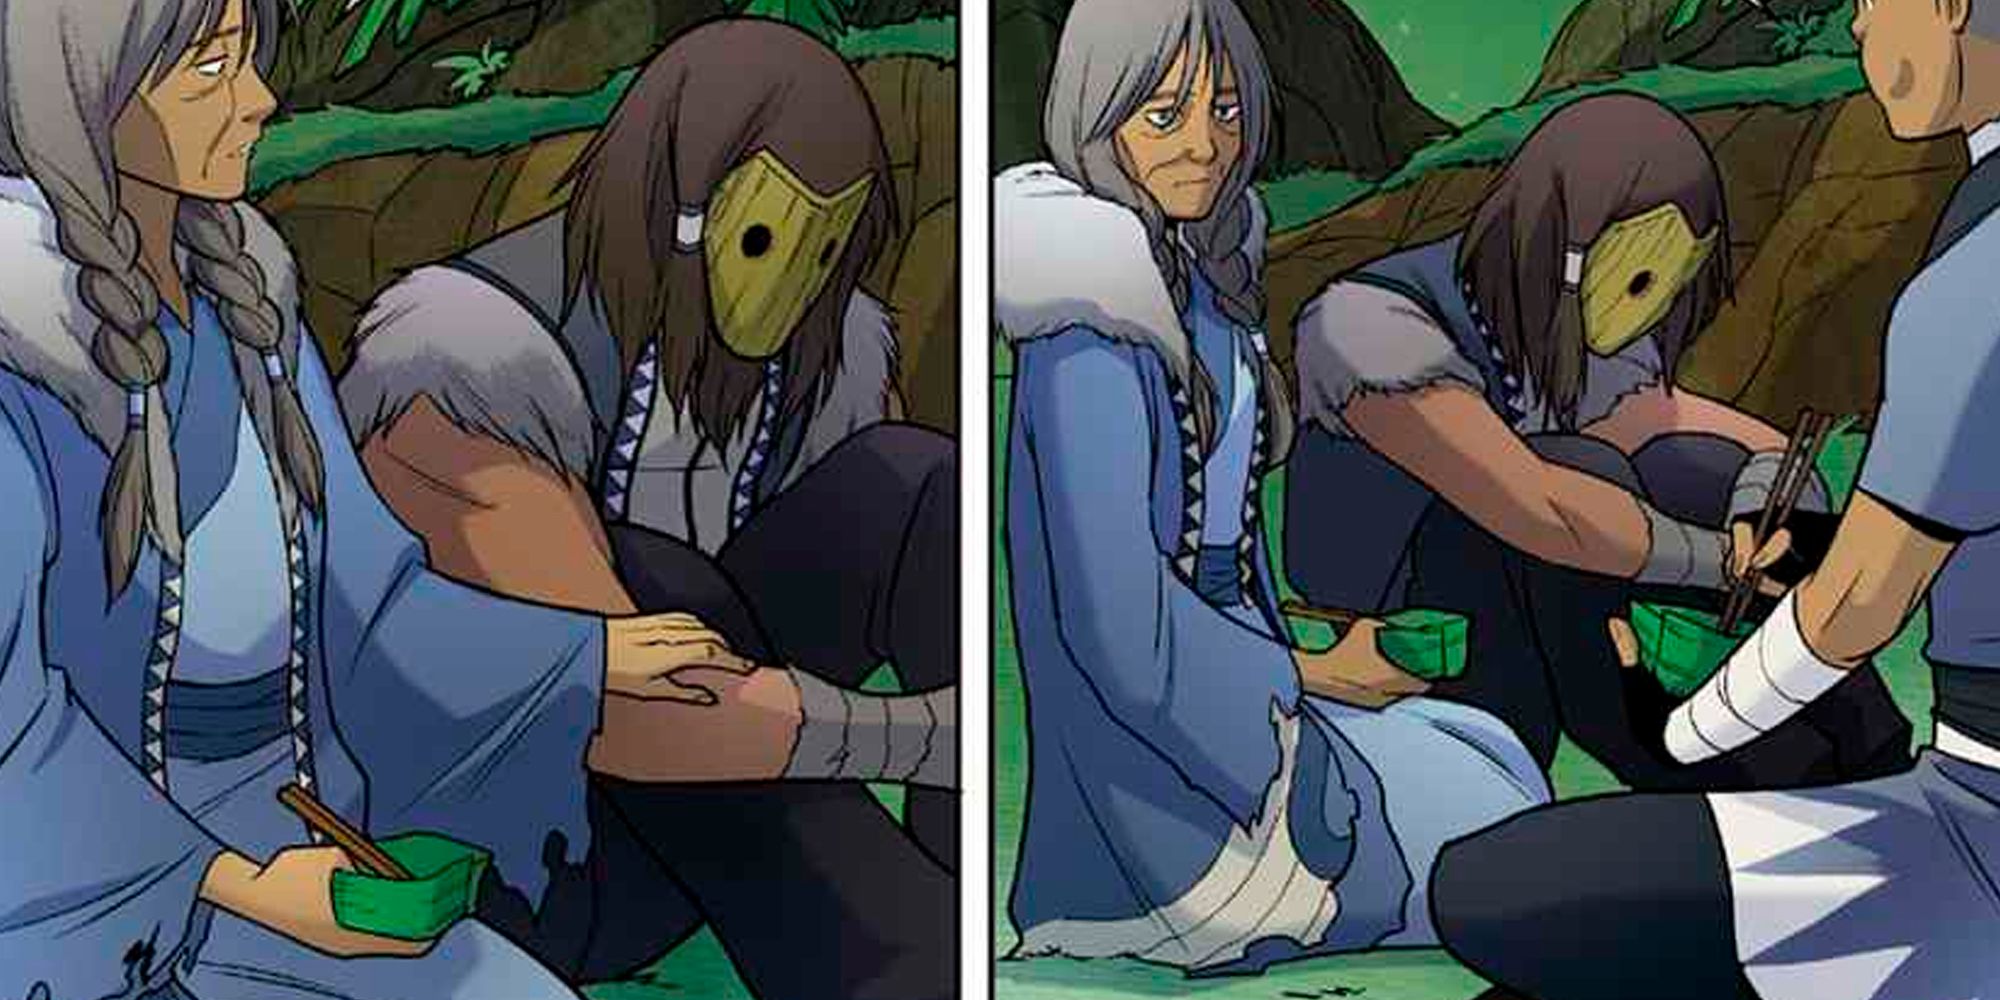 Koh Stole the Face of Rafa in the Avatar The Last Airbender sequel comic The Search